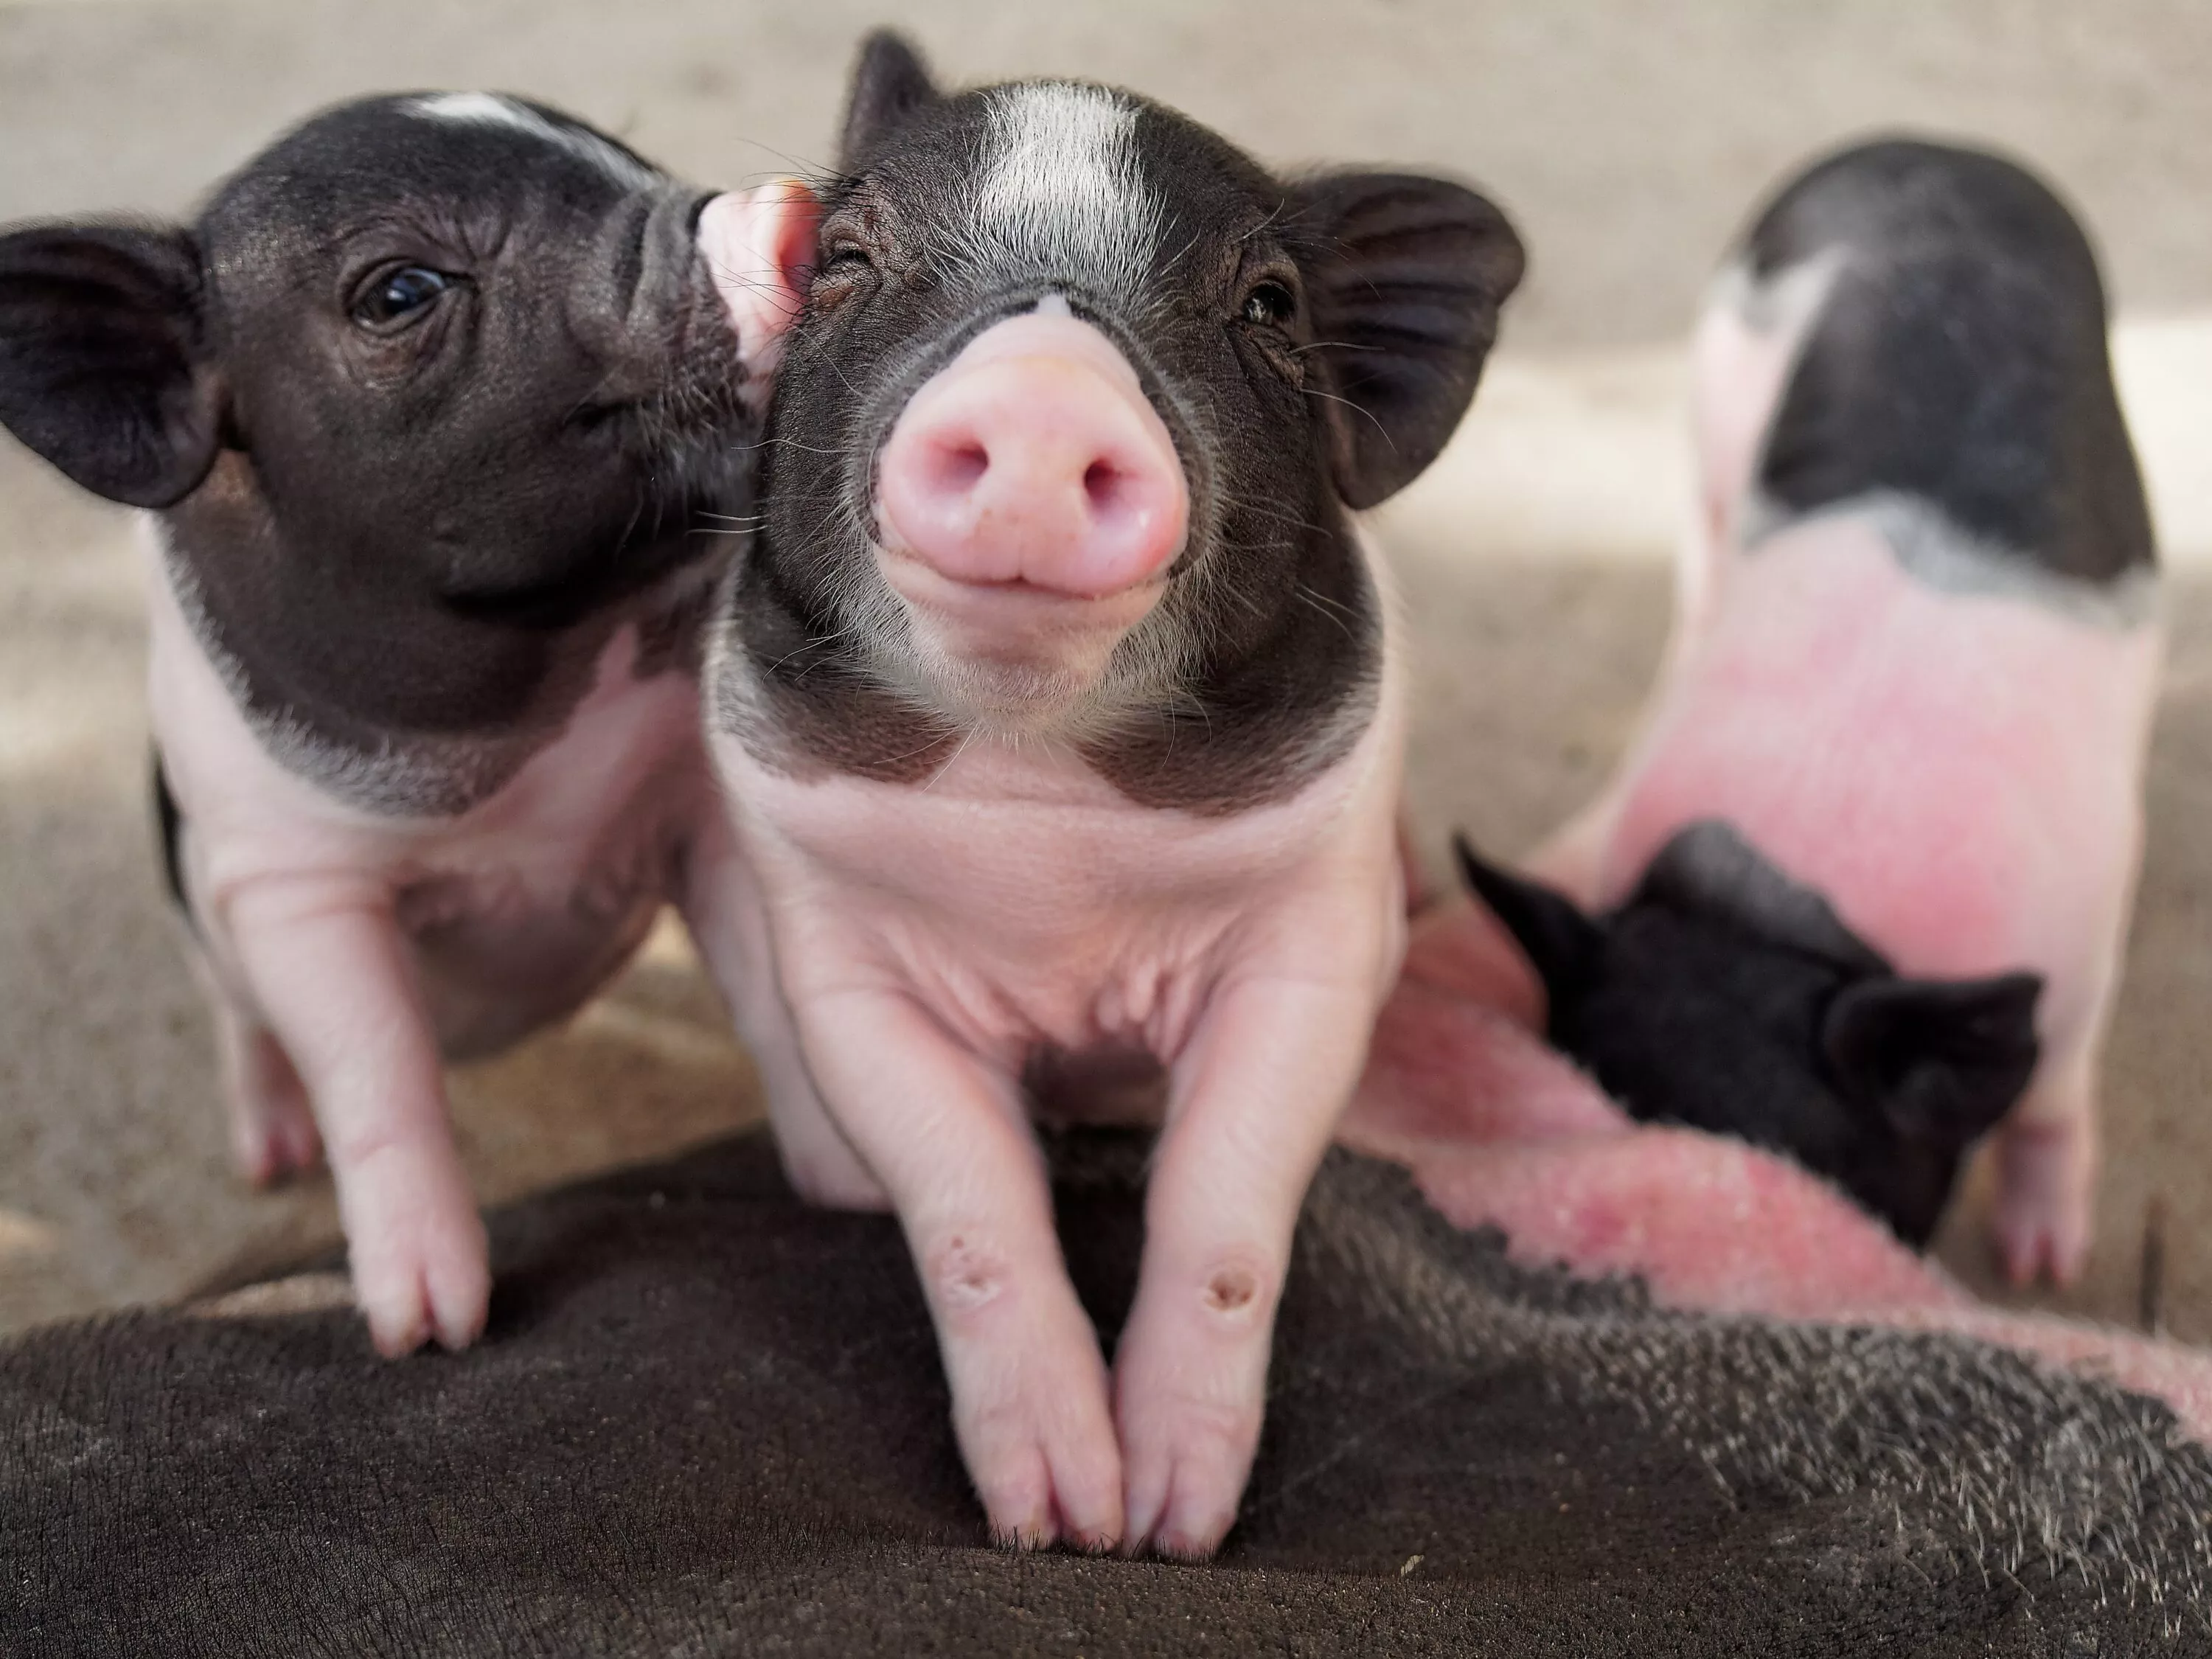 Piglets are loving animals. These two piglets are cuddling. One is smirking while the other one is nuzzling him. 